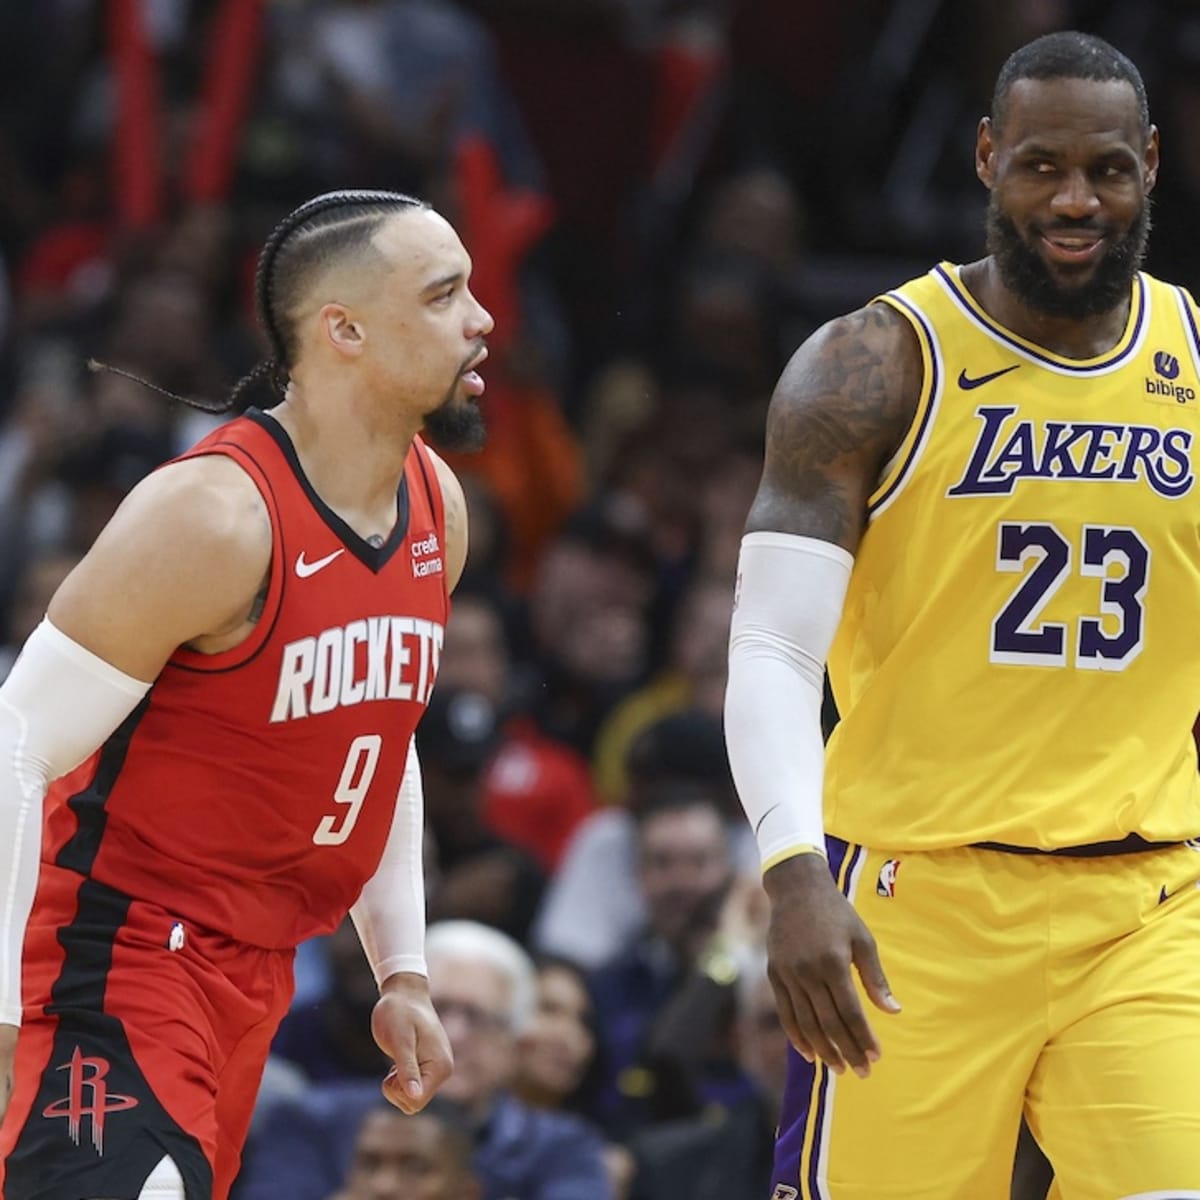 Dillon Brooks Keeps LeBron James Feud Going With Taunting and Flagrant Foul  - Sports Illustrated